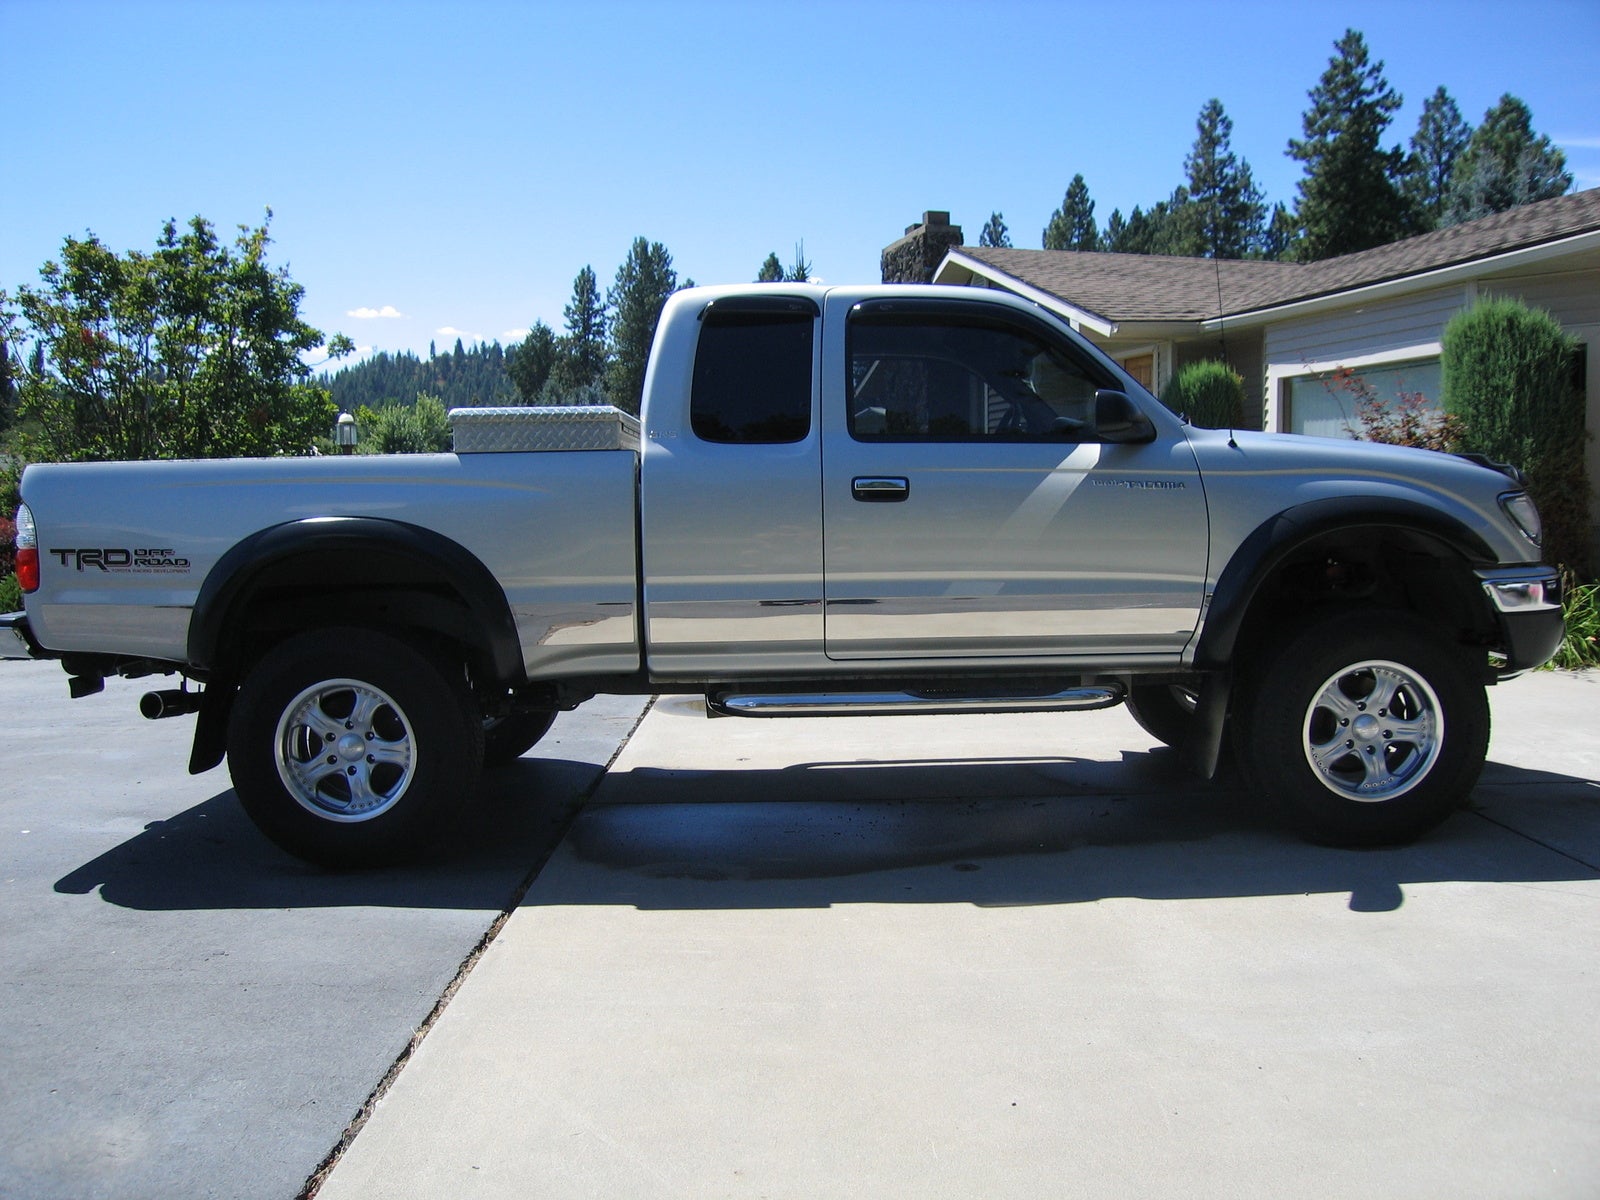 2004 toyota tacoma 4x4 extended cab #2